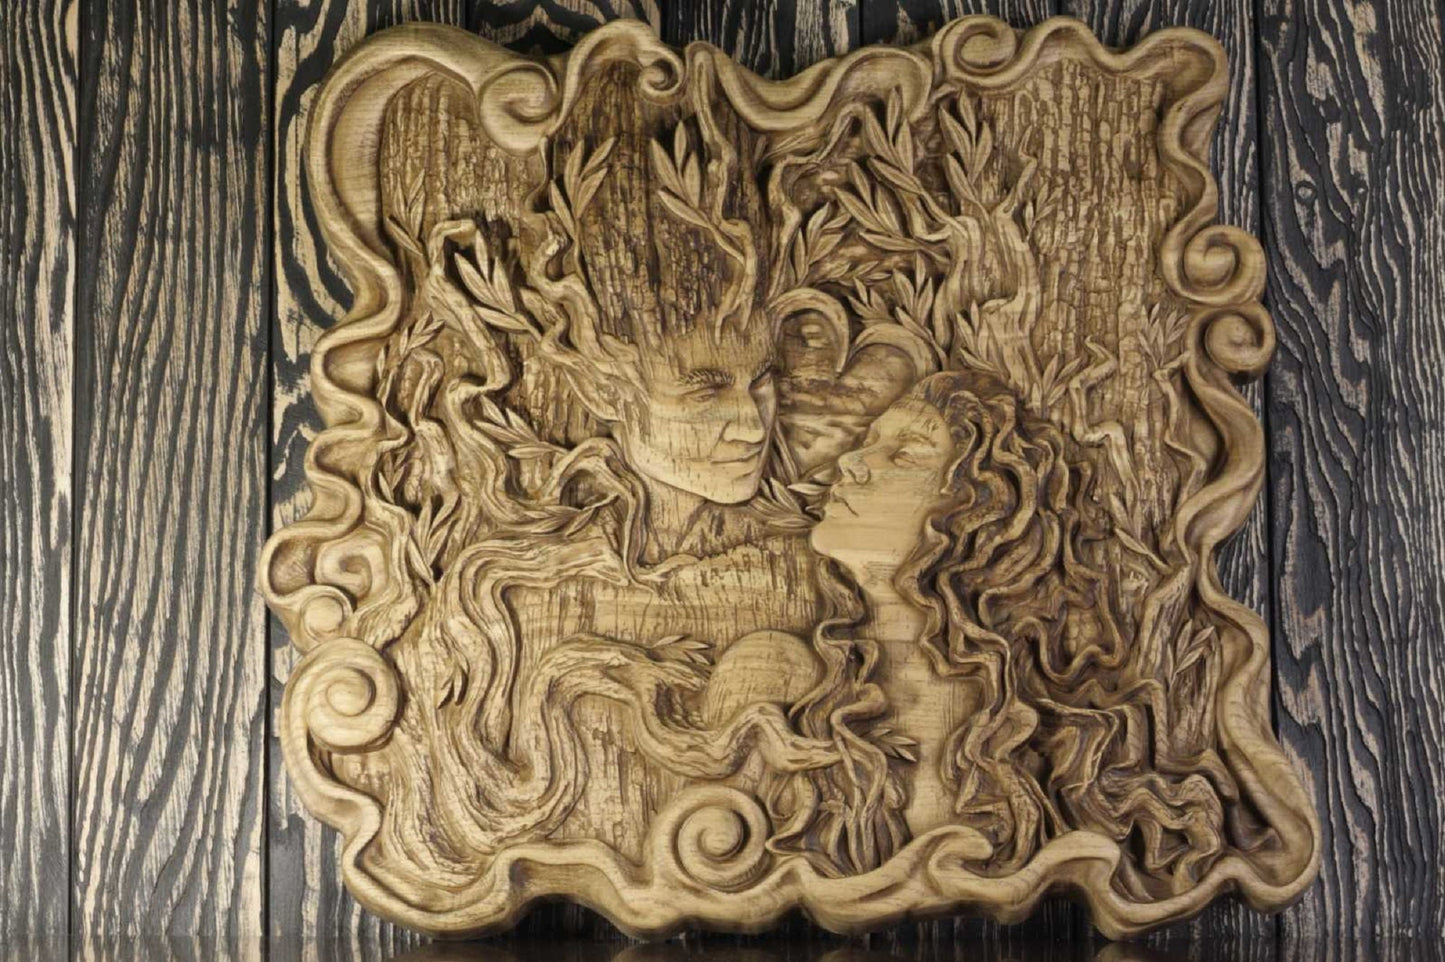 Carved wood wall art, Wood carving picture